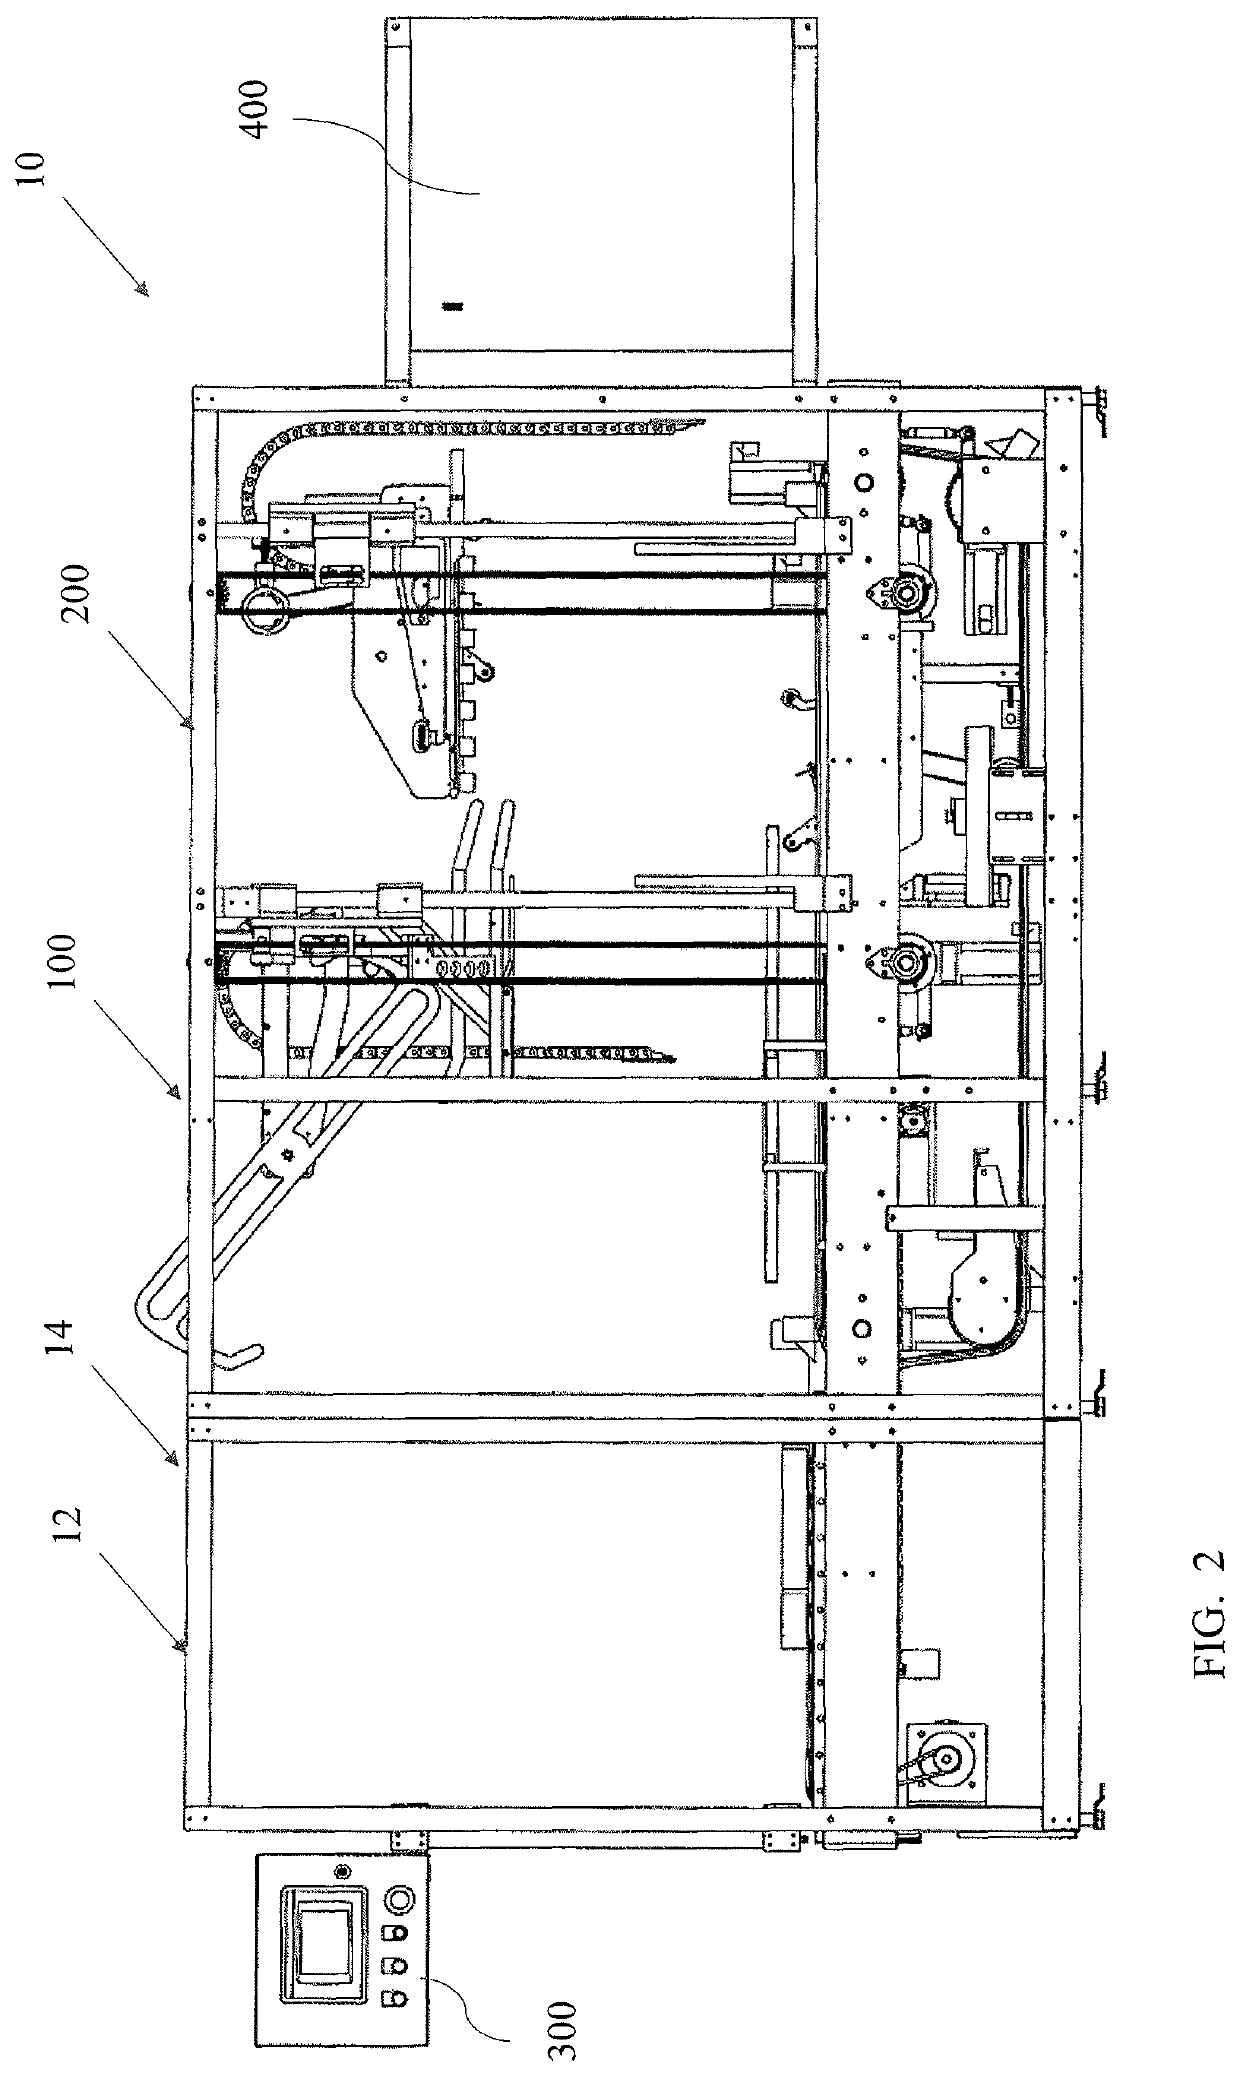 Packaging machinery having automated adjustments based on package parameters